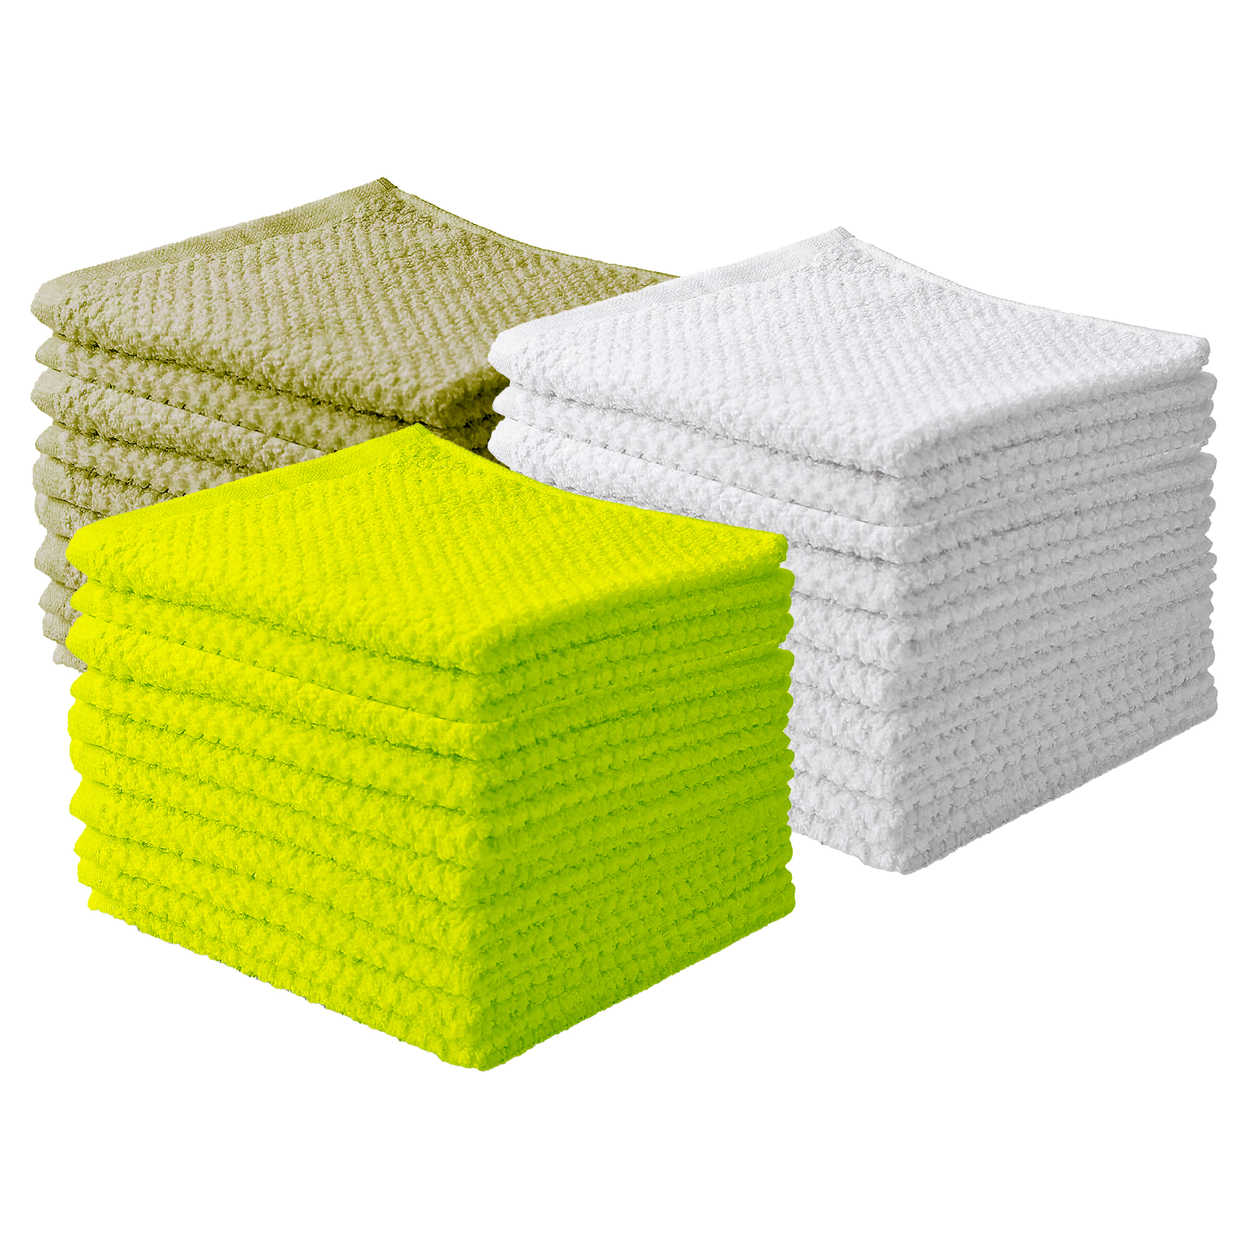 40-Pack: Multipurpose Super Absorbent Ultra Soft 100% Cotton Ring Spun Stitched Wash Cloths